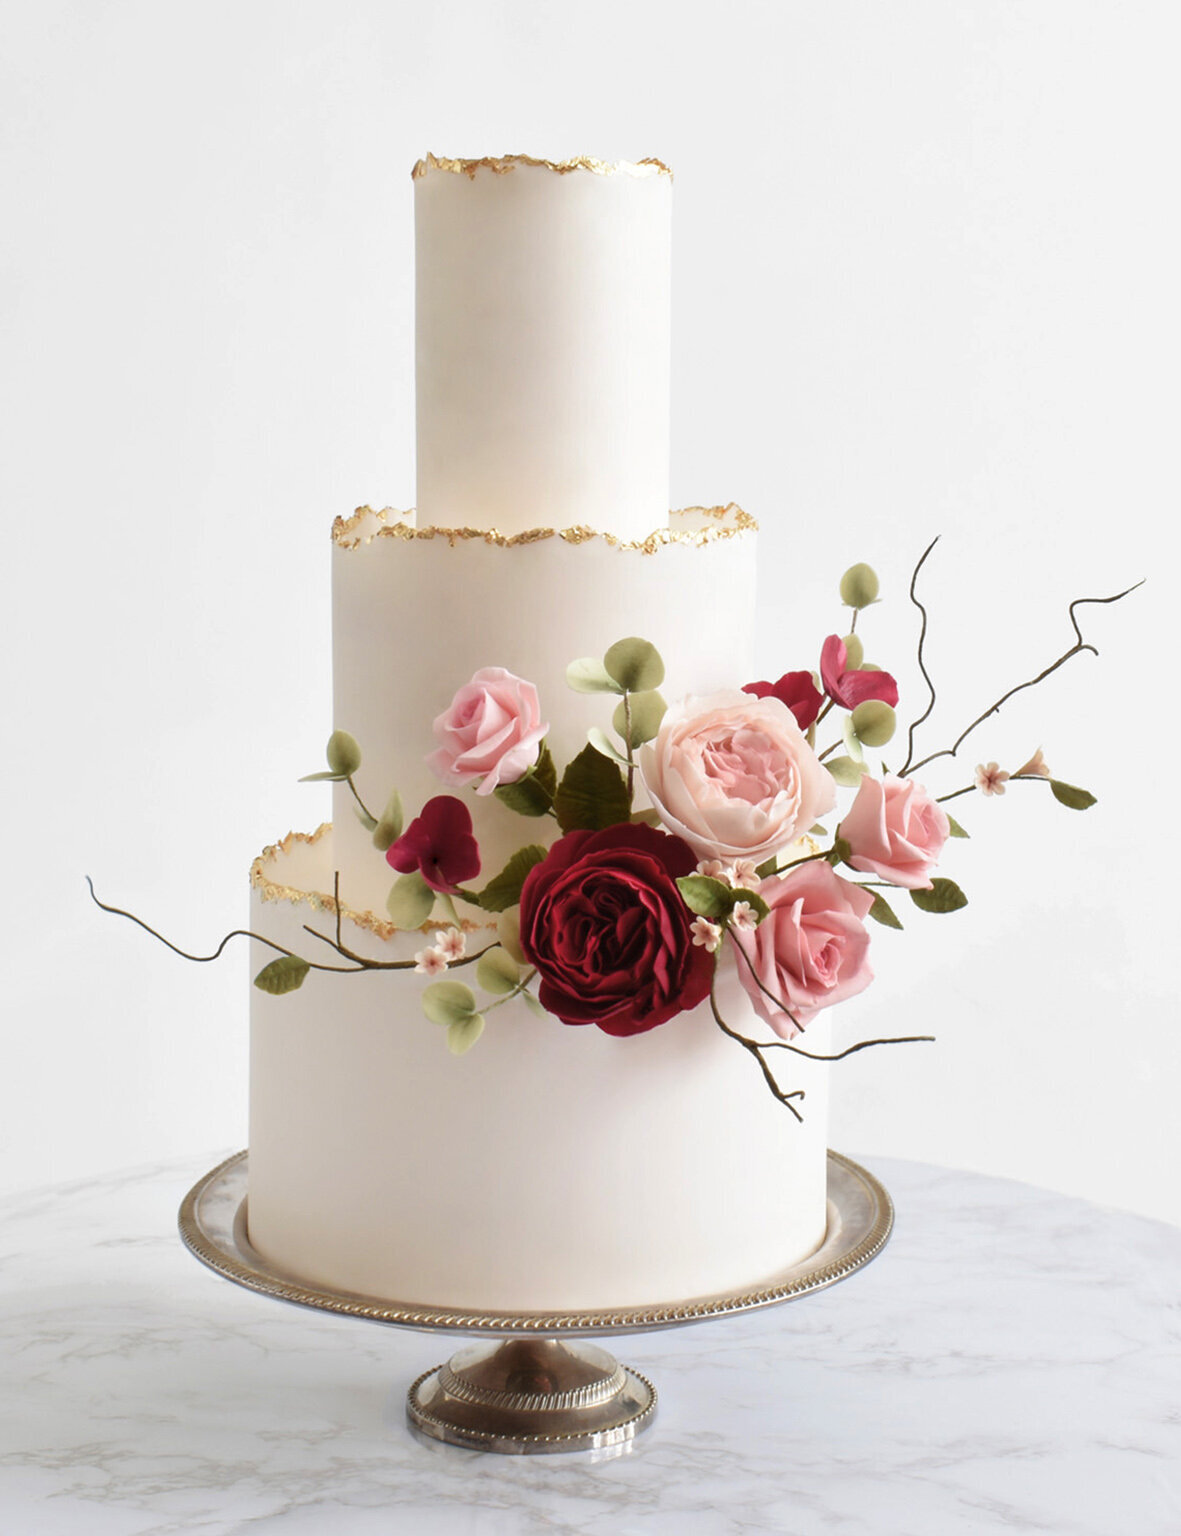 a three tiered white wedding cake with gold leaf edged and a bouquet of pink and deep red roses made out of sugar